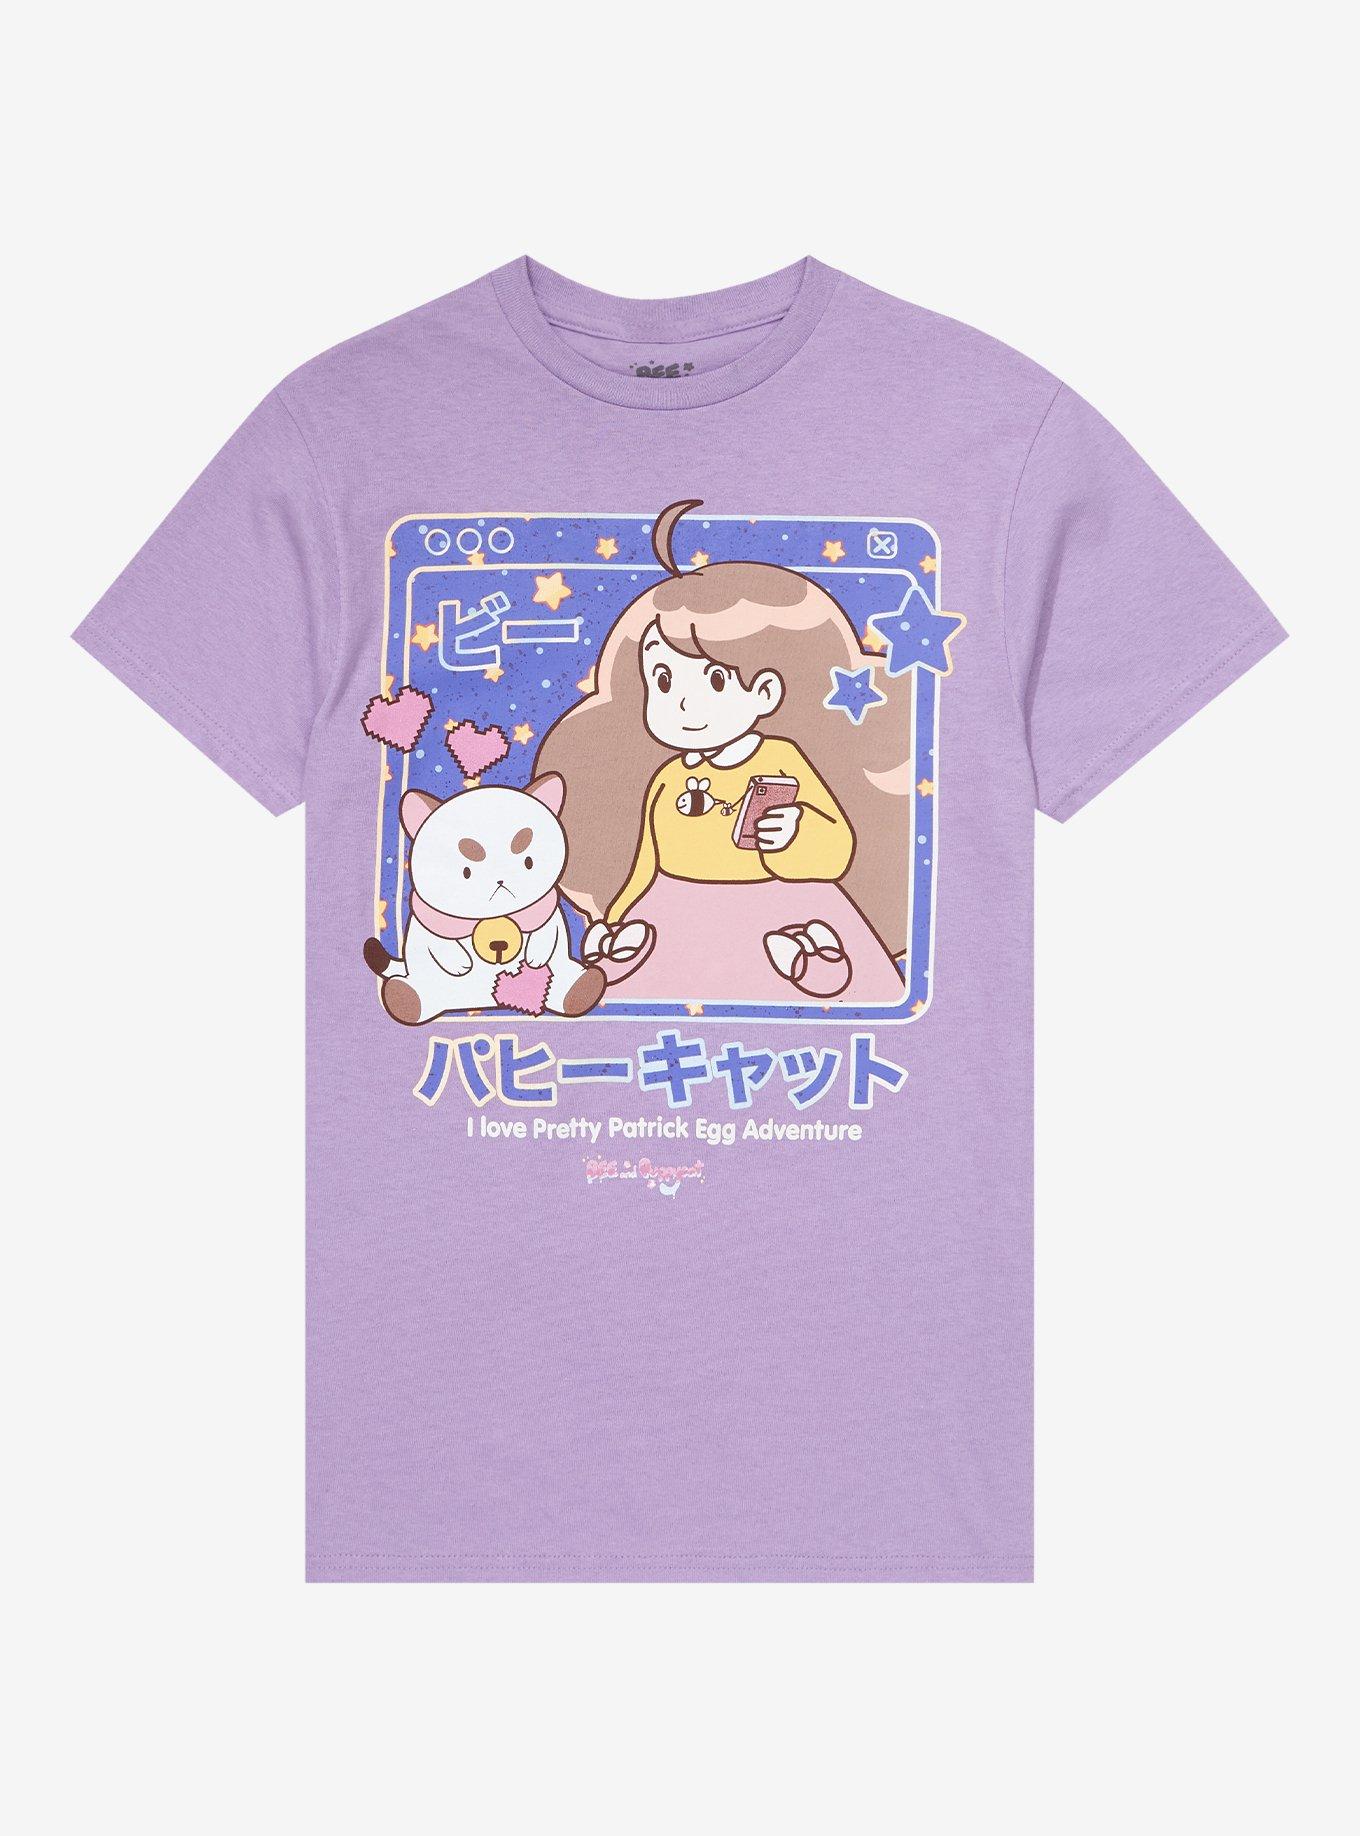 Bee And PuppyCat: Lazy In Space Duo Boyfriend Fit Girls T-Shirt, MULTI, hi-res